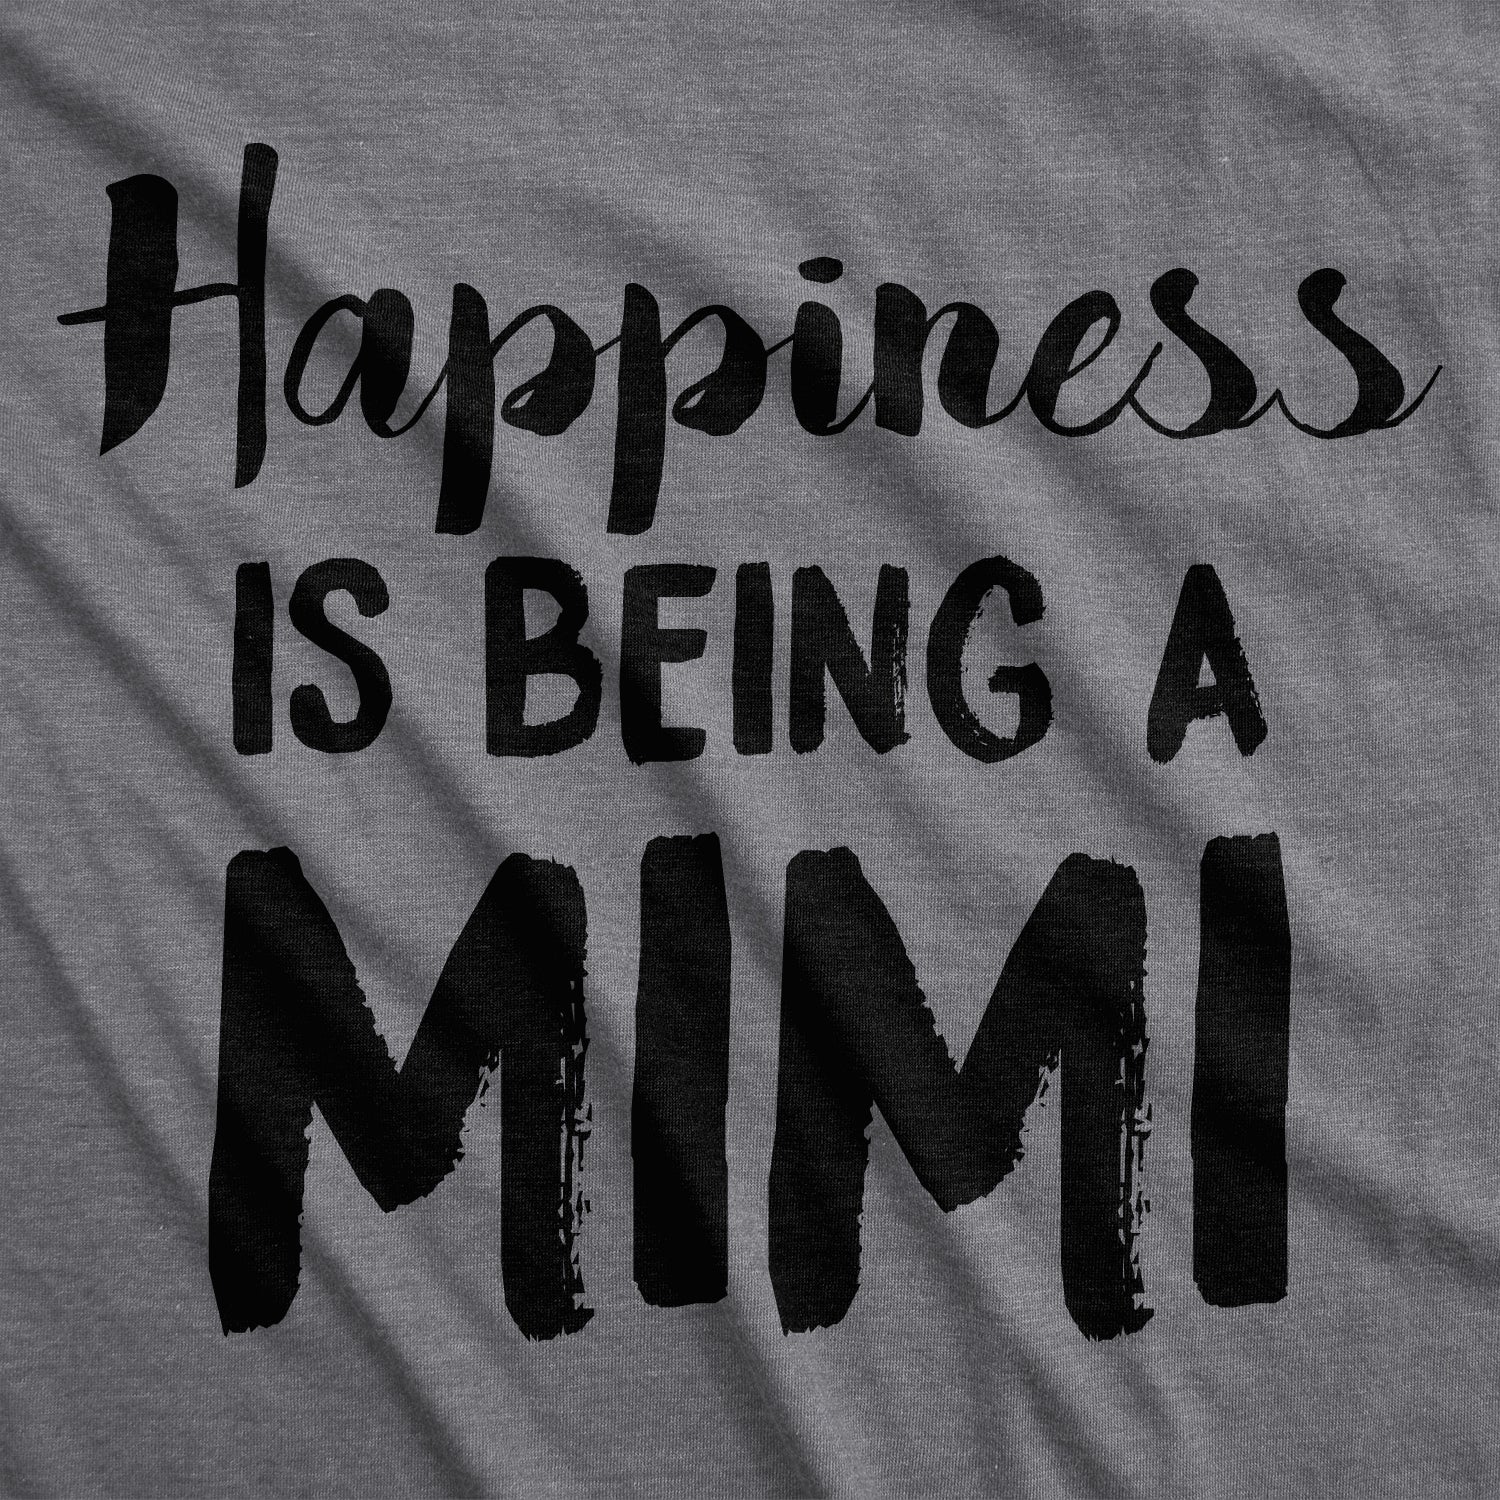 Funny Dark Heather Grey - Happiness Mimi Happiness Is Being A Mimi Womens T Shirt Nerdy Mother's Day Grandfather Tee